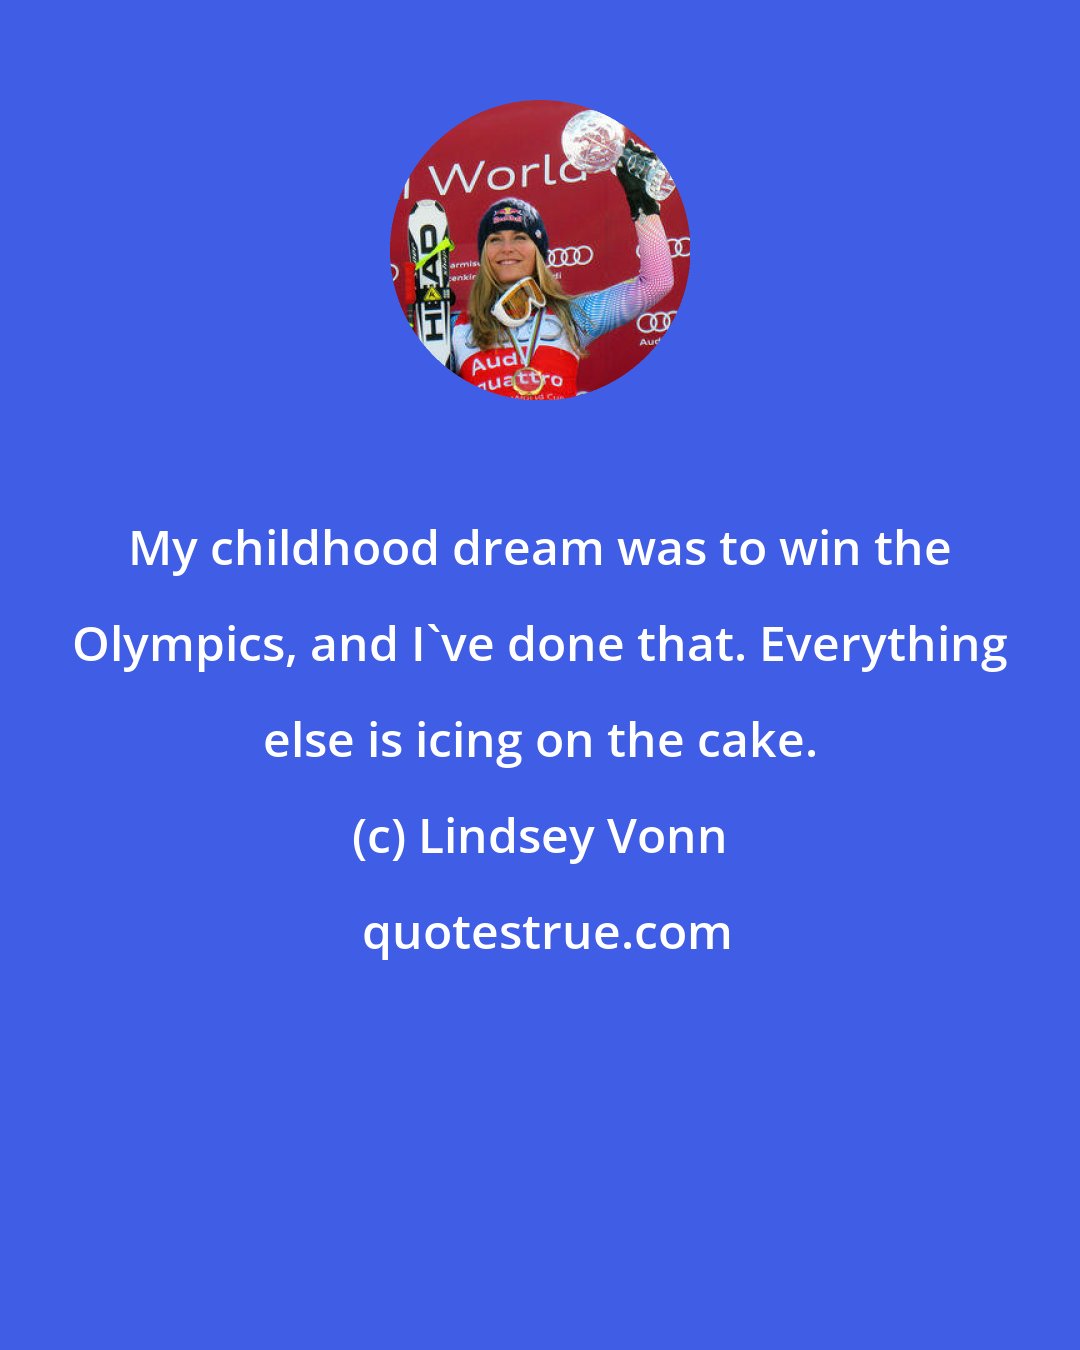 Lindsey Vonn: My childhood dream was to win the Olympics, and I've done that. Everything else is icing on the cake.